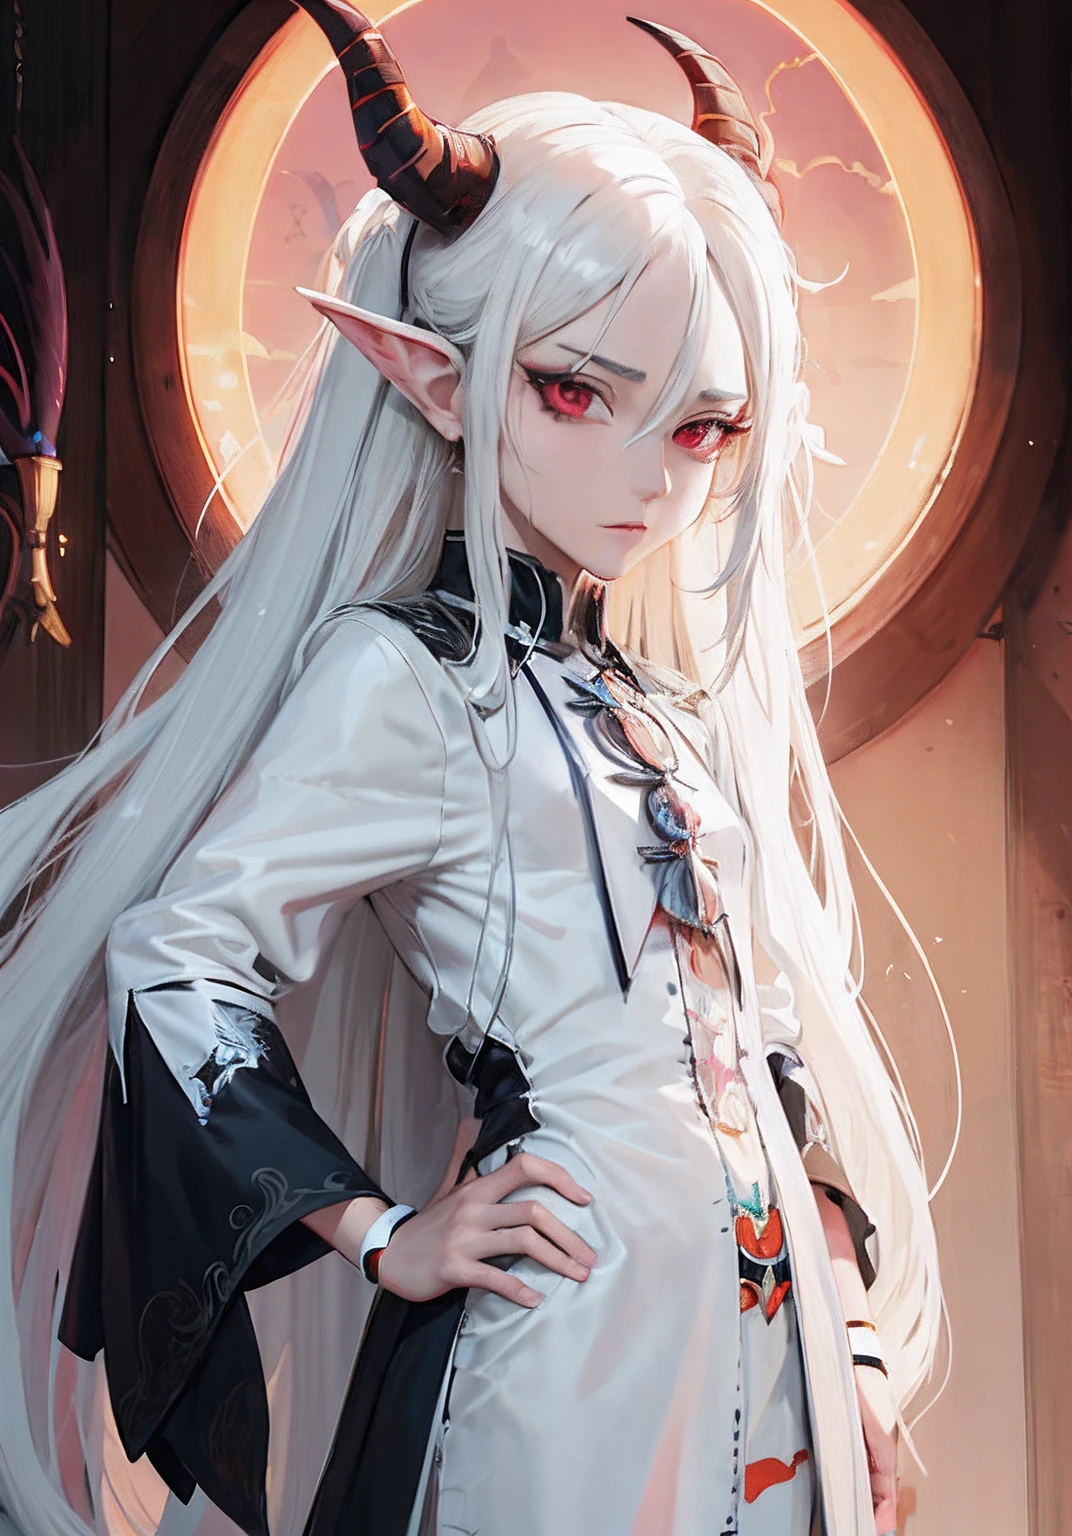 anime - style image of a men with long white hair and horns, white haired deity, anime style 4 k, detailed digital anime art, 2. 5 d cgi anime fantasy artwork, anime art wallpaper 4k, anime art wallpaper 4 k, anime art wallpaper 8 k, anime fantasy artwork, anime in fantasy style, anime fantasy illustration, detailed anime character art, boy dragon, style semi realistc